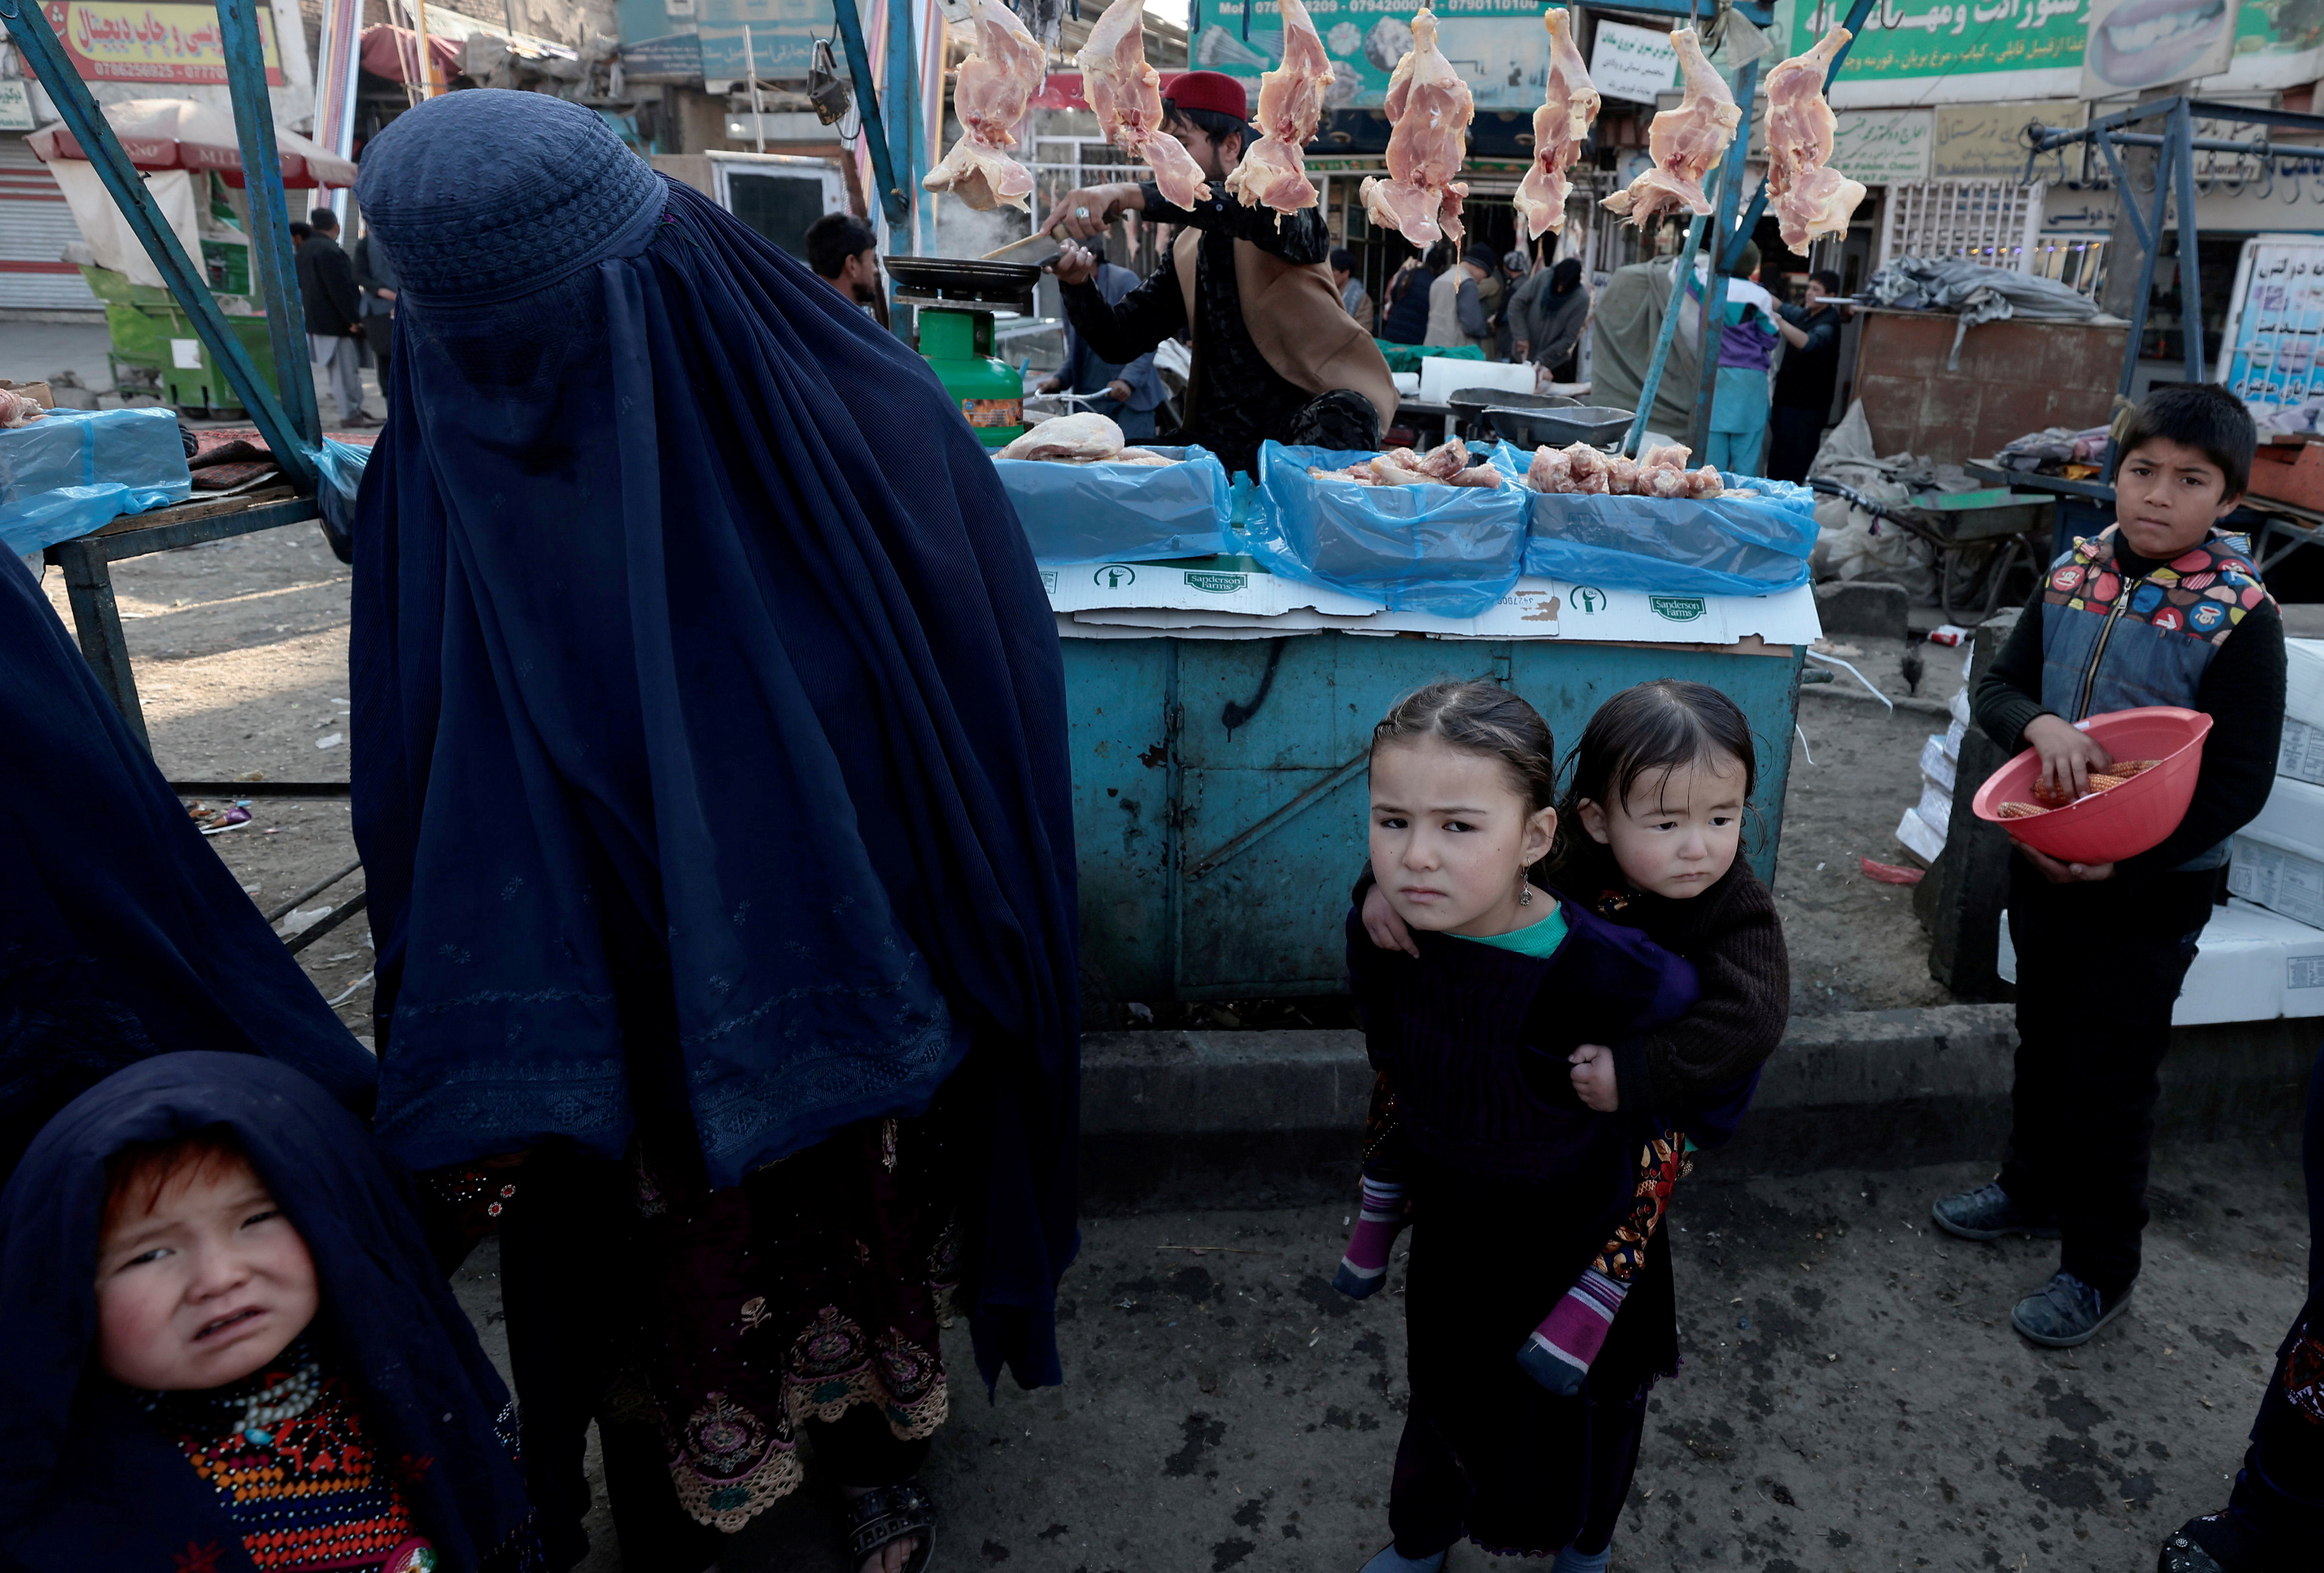 A mother shops with her children at the market in Kabul, Afghanistan October 29, 2021. REUTERS/Zohra Bensemra/File Photo